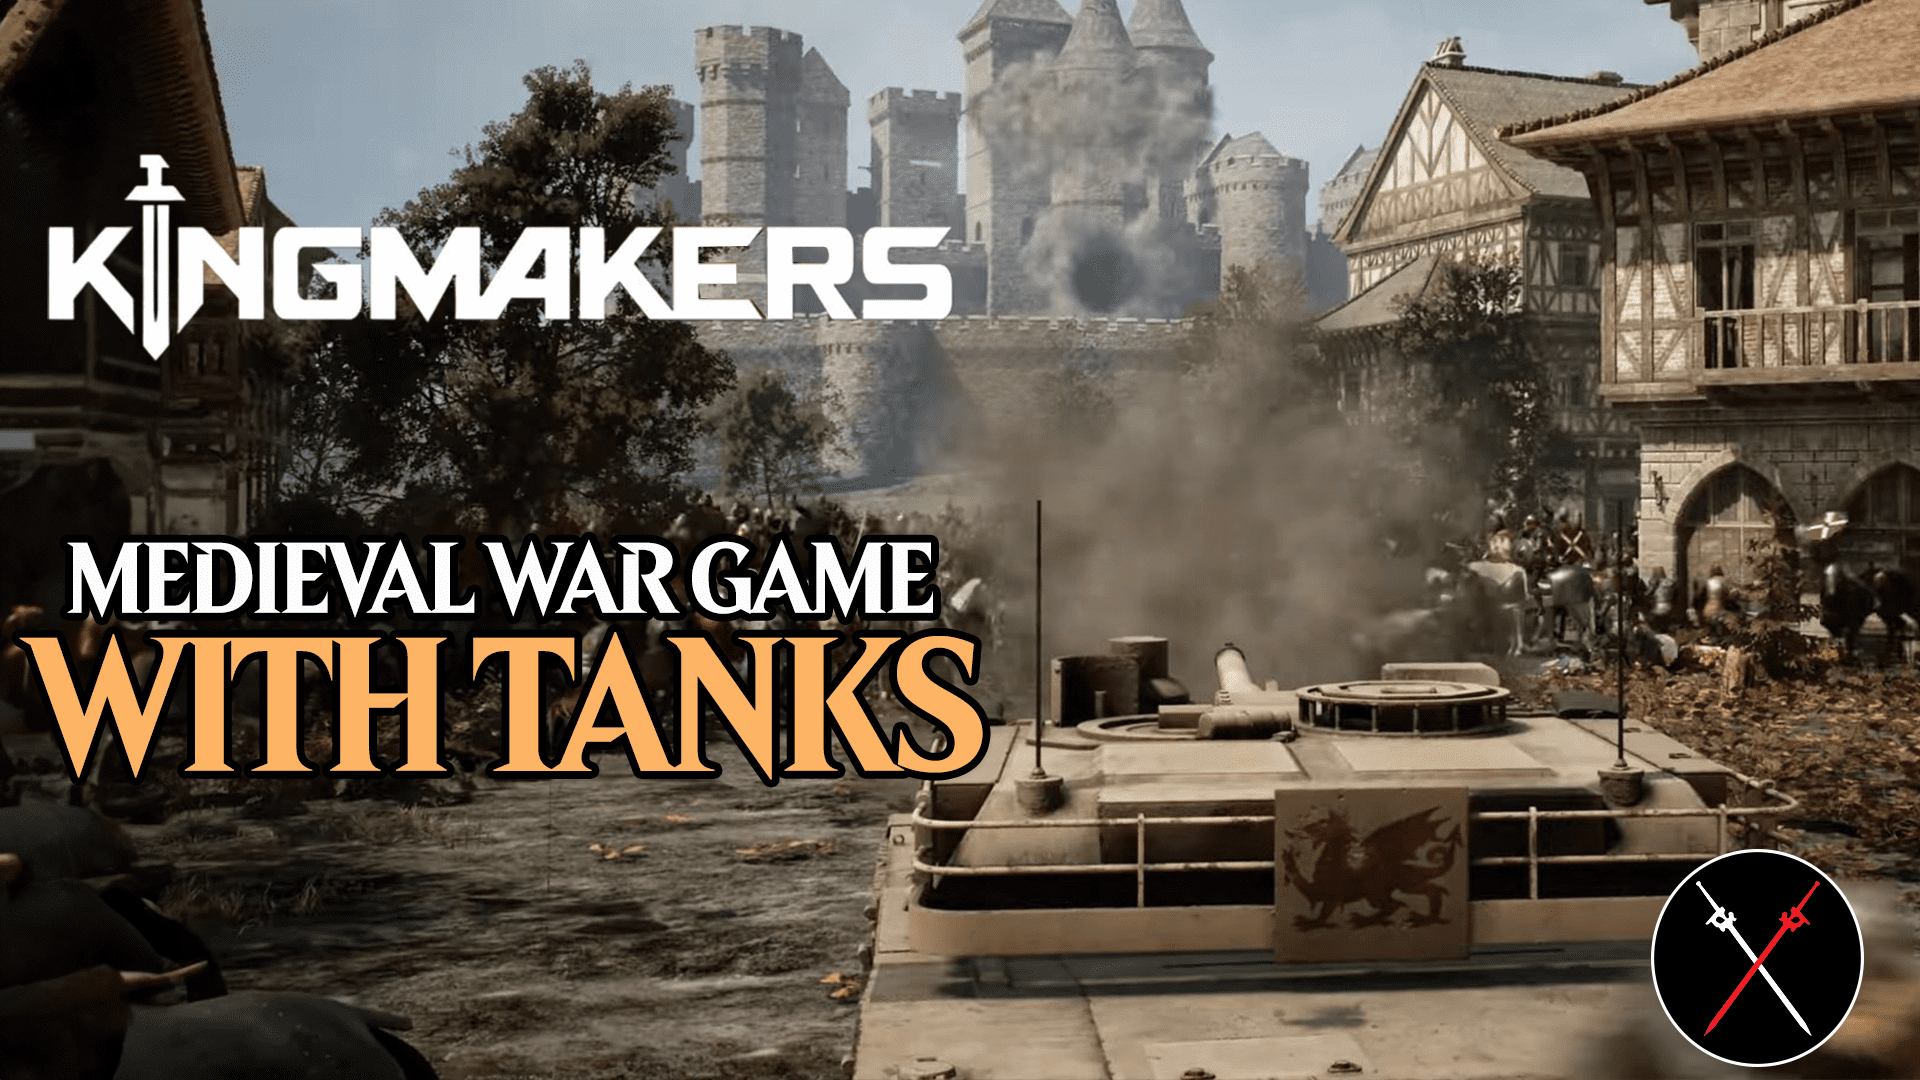 Kingmakers Has Released a New Trailer